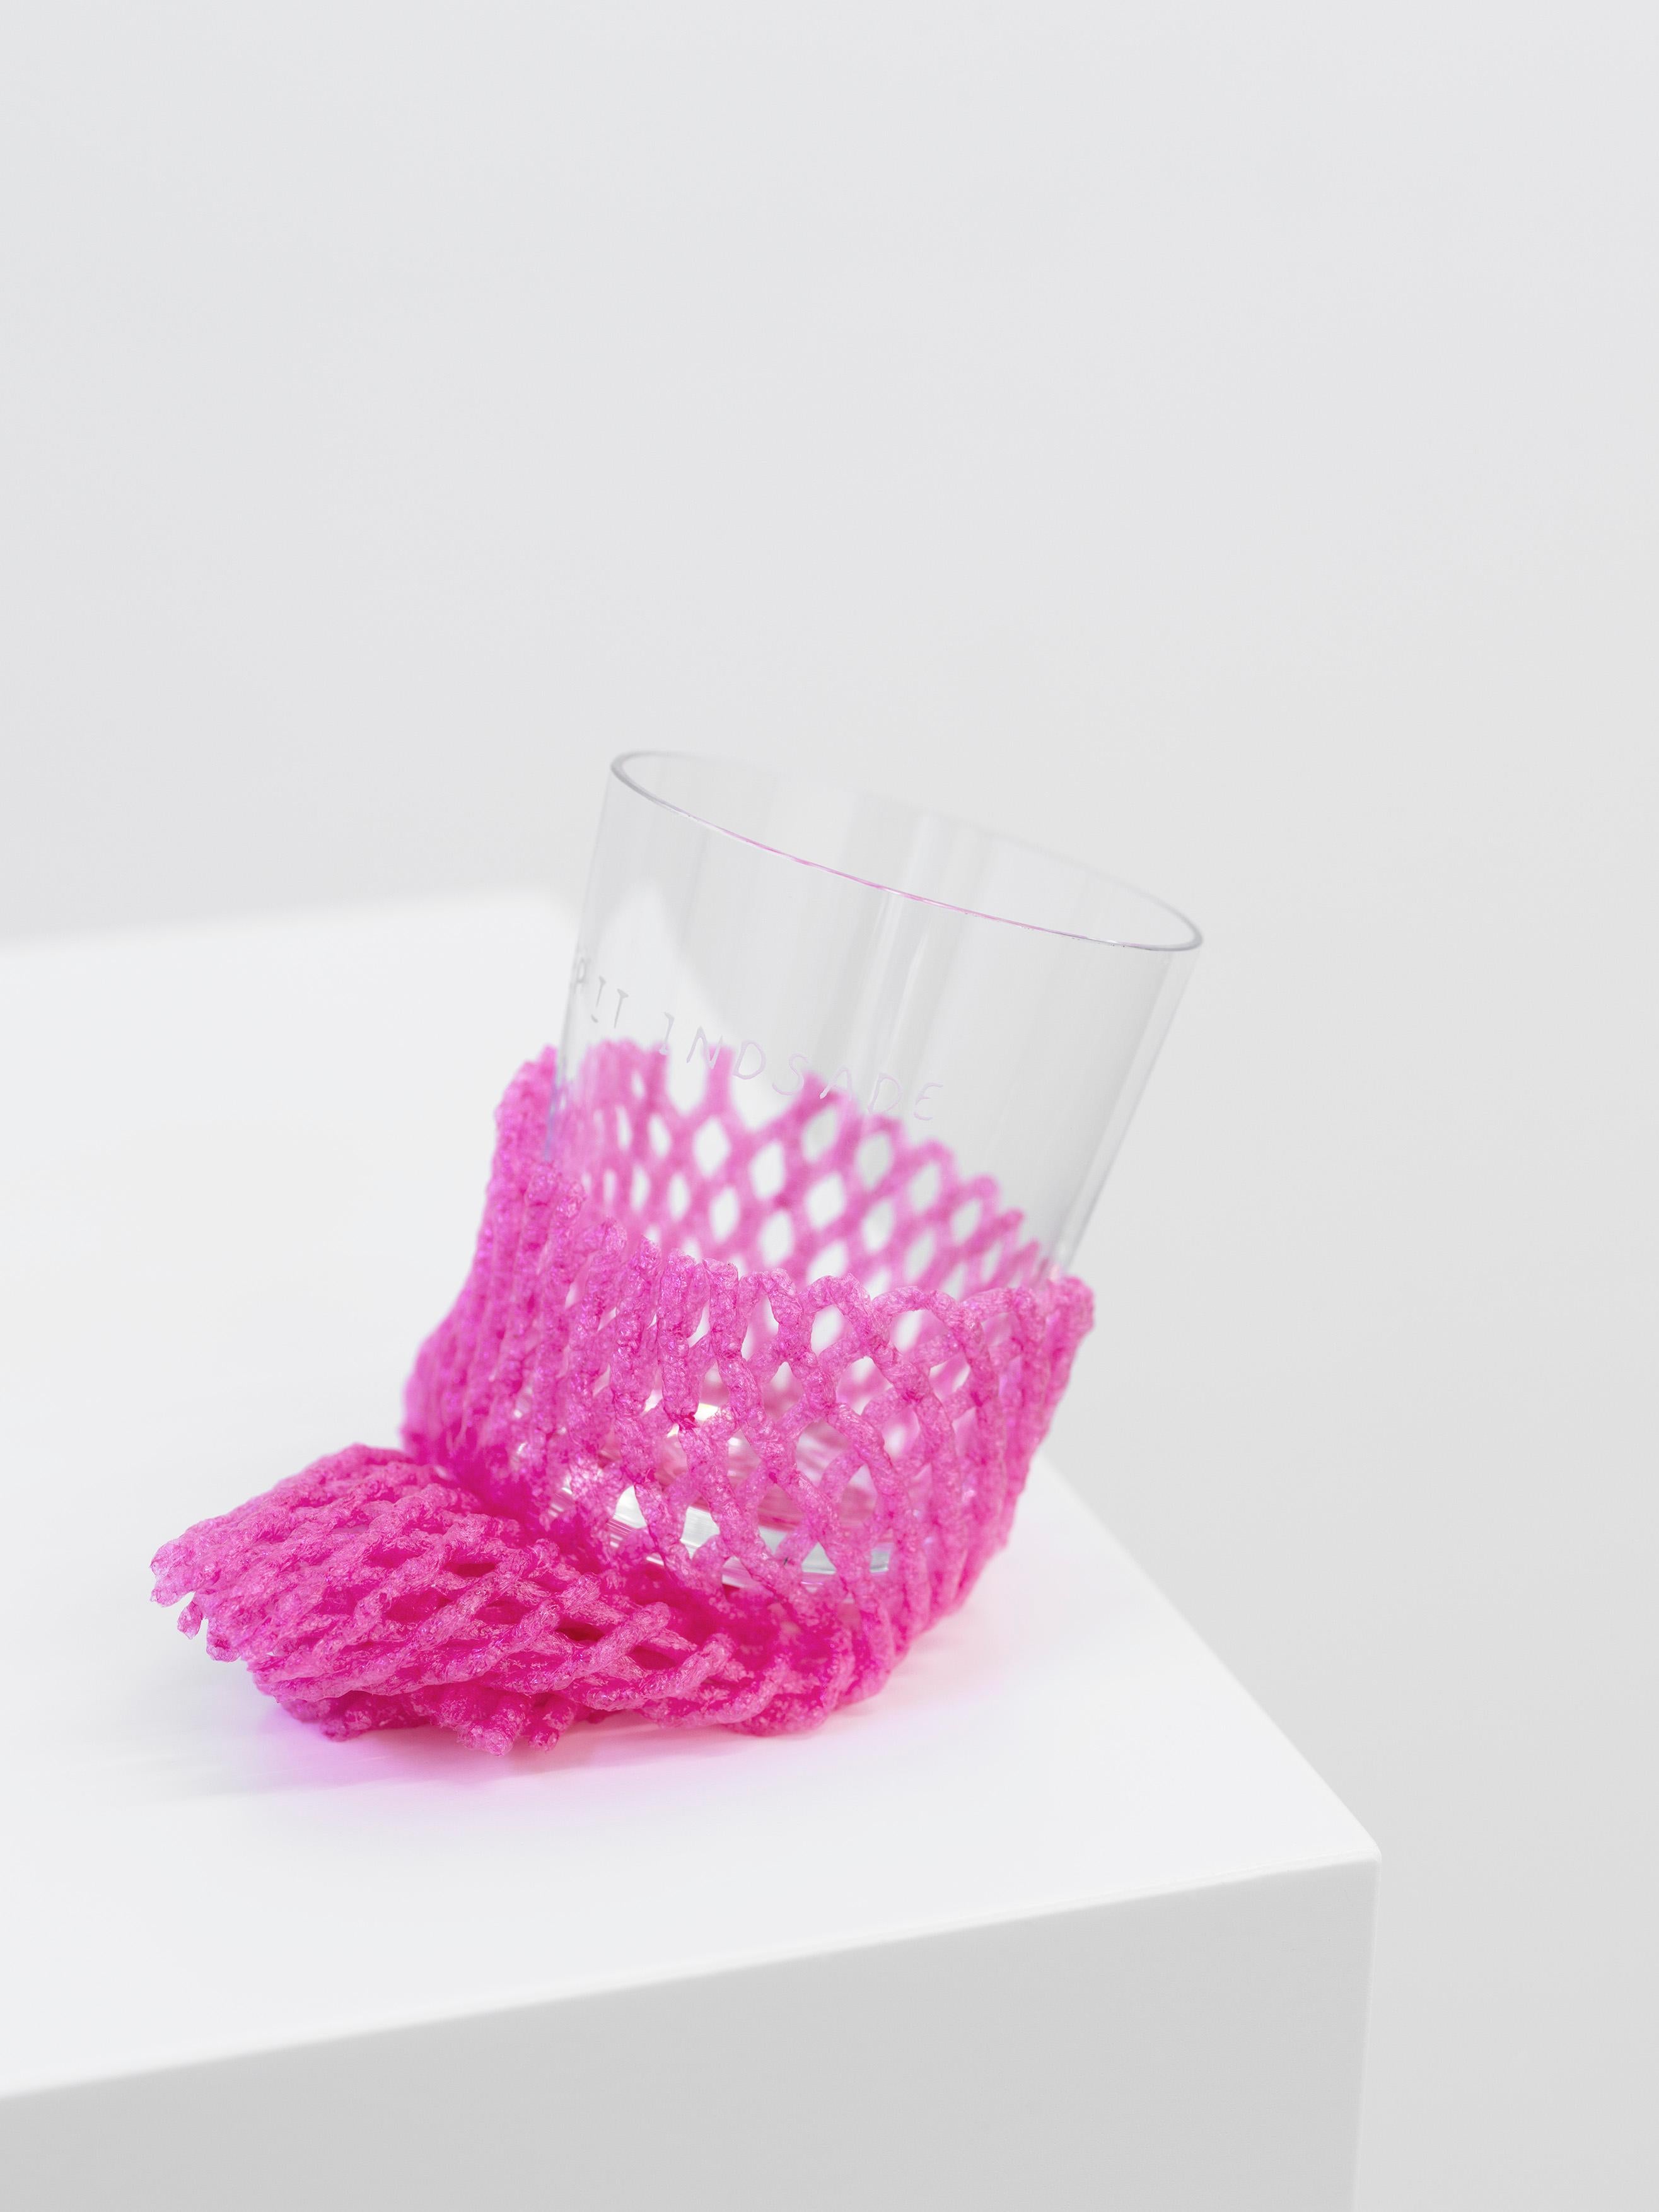 Two delicate pieces of glassware, a carafe and a glass, with an inscription that reads ‘kep it insade, tring not to brick’. With her contribution to the Normann X Brask Art Collection, Gudrun Hasle exposes, and plays on, her diagnosed dyslexia. Even